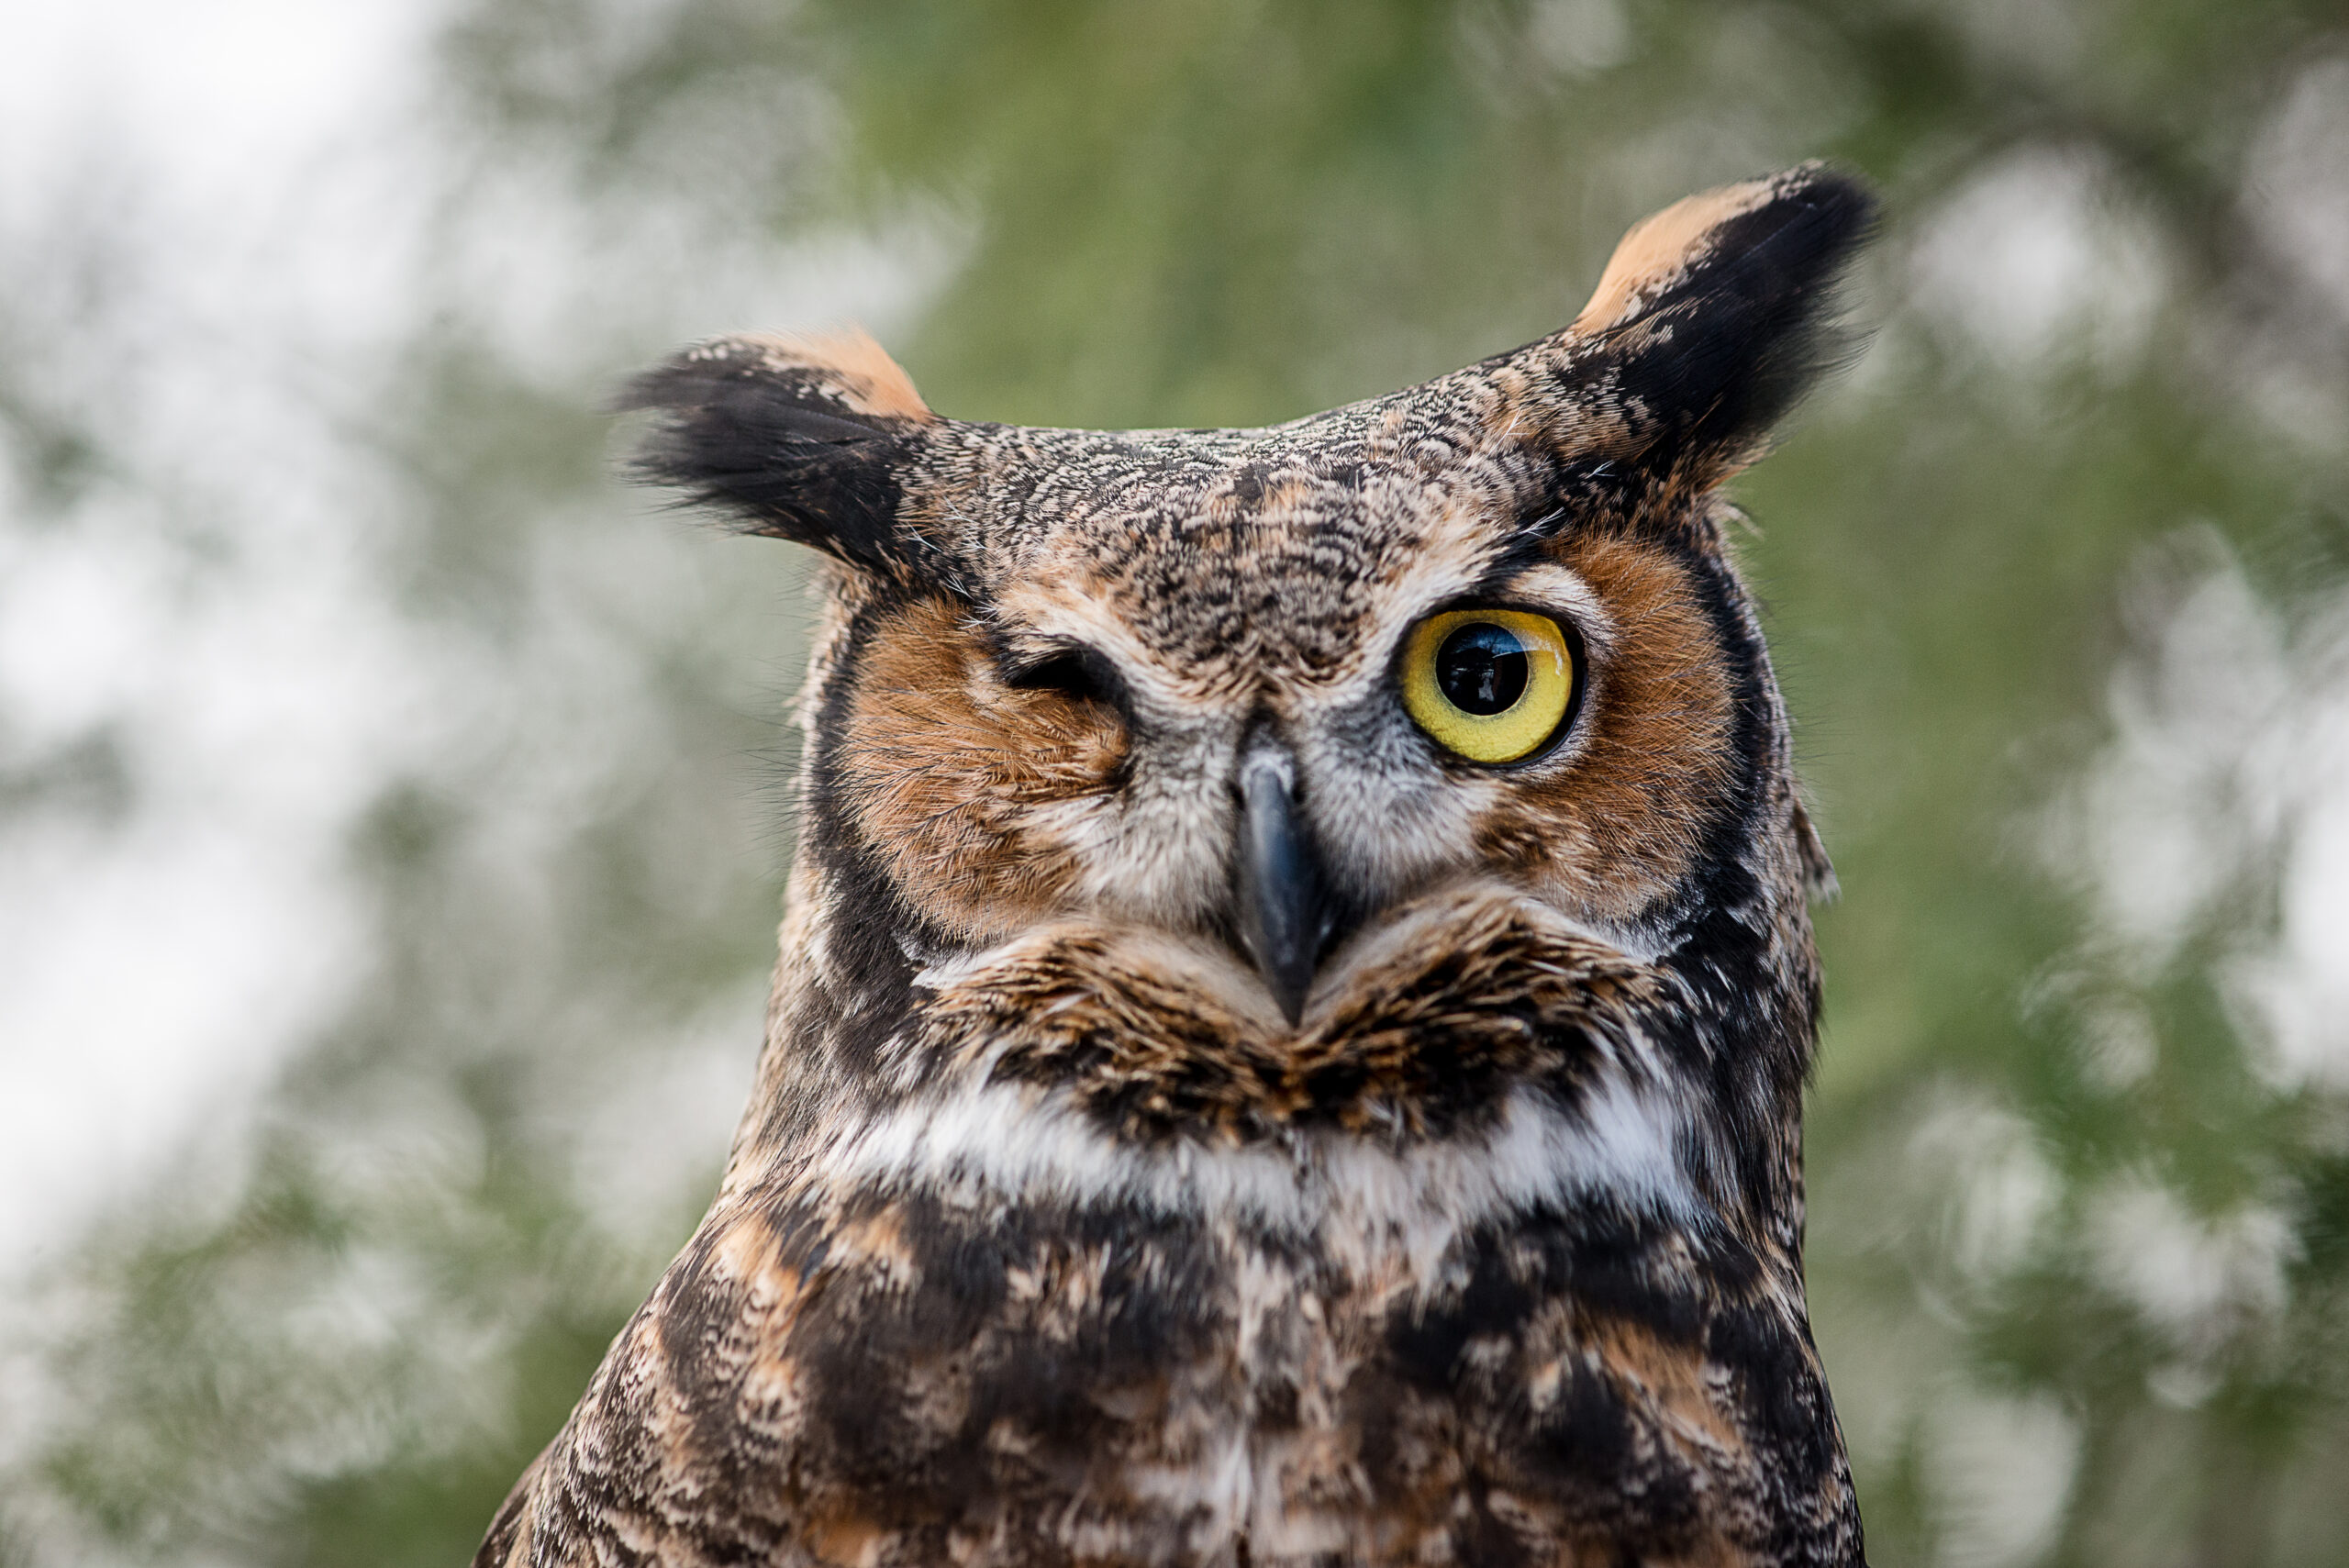 Superb Owl Sunday: 8 Fun Facts About Owls